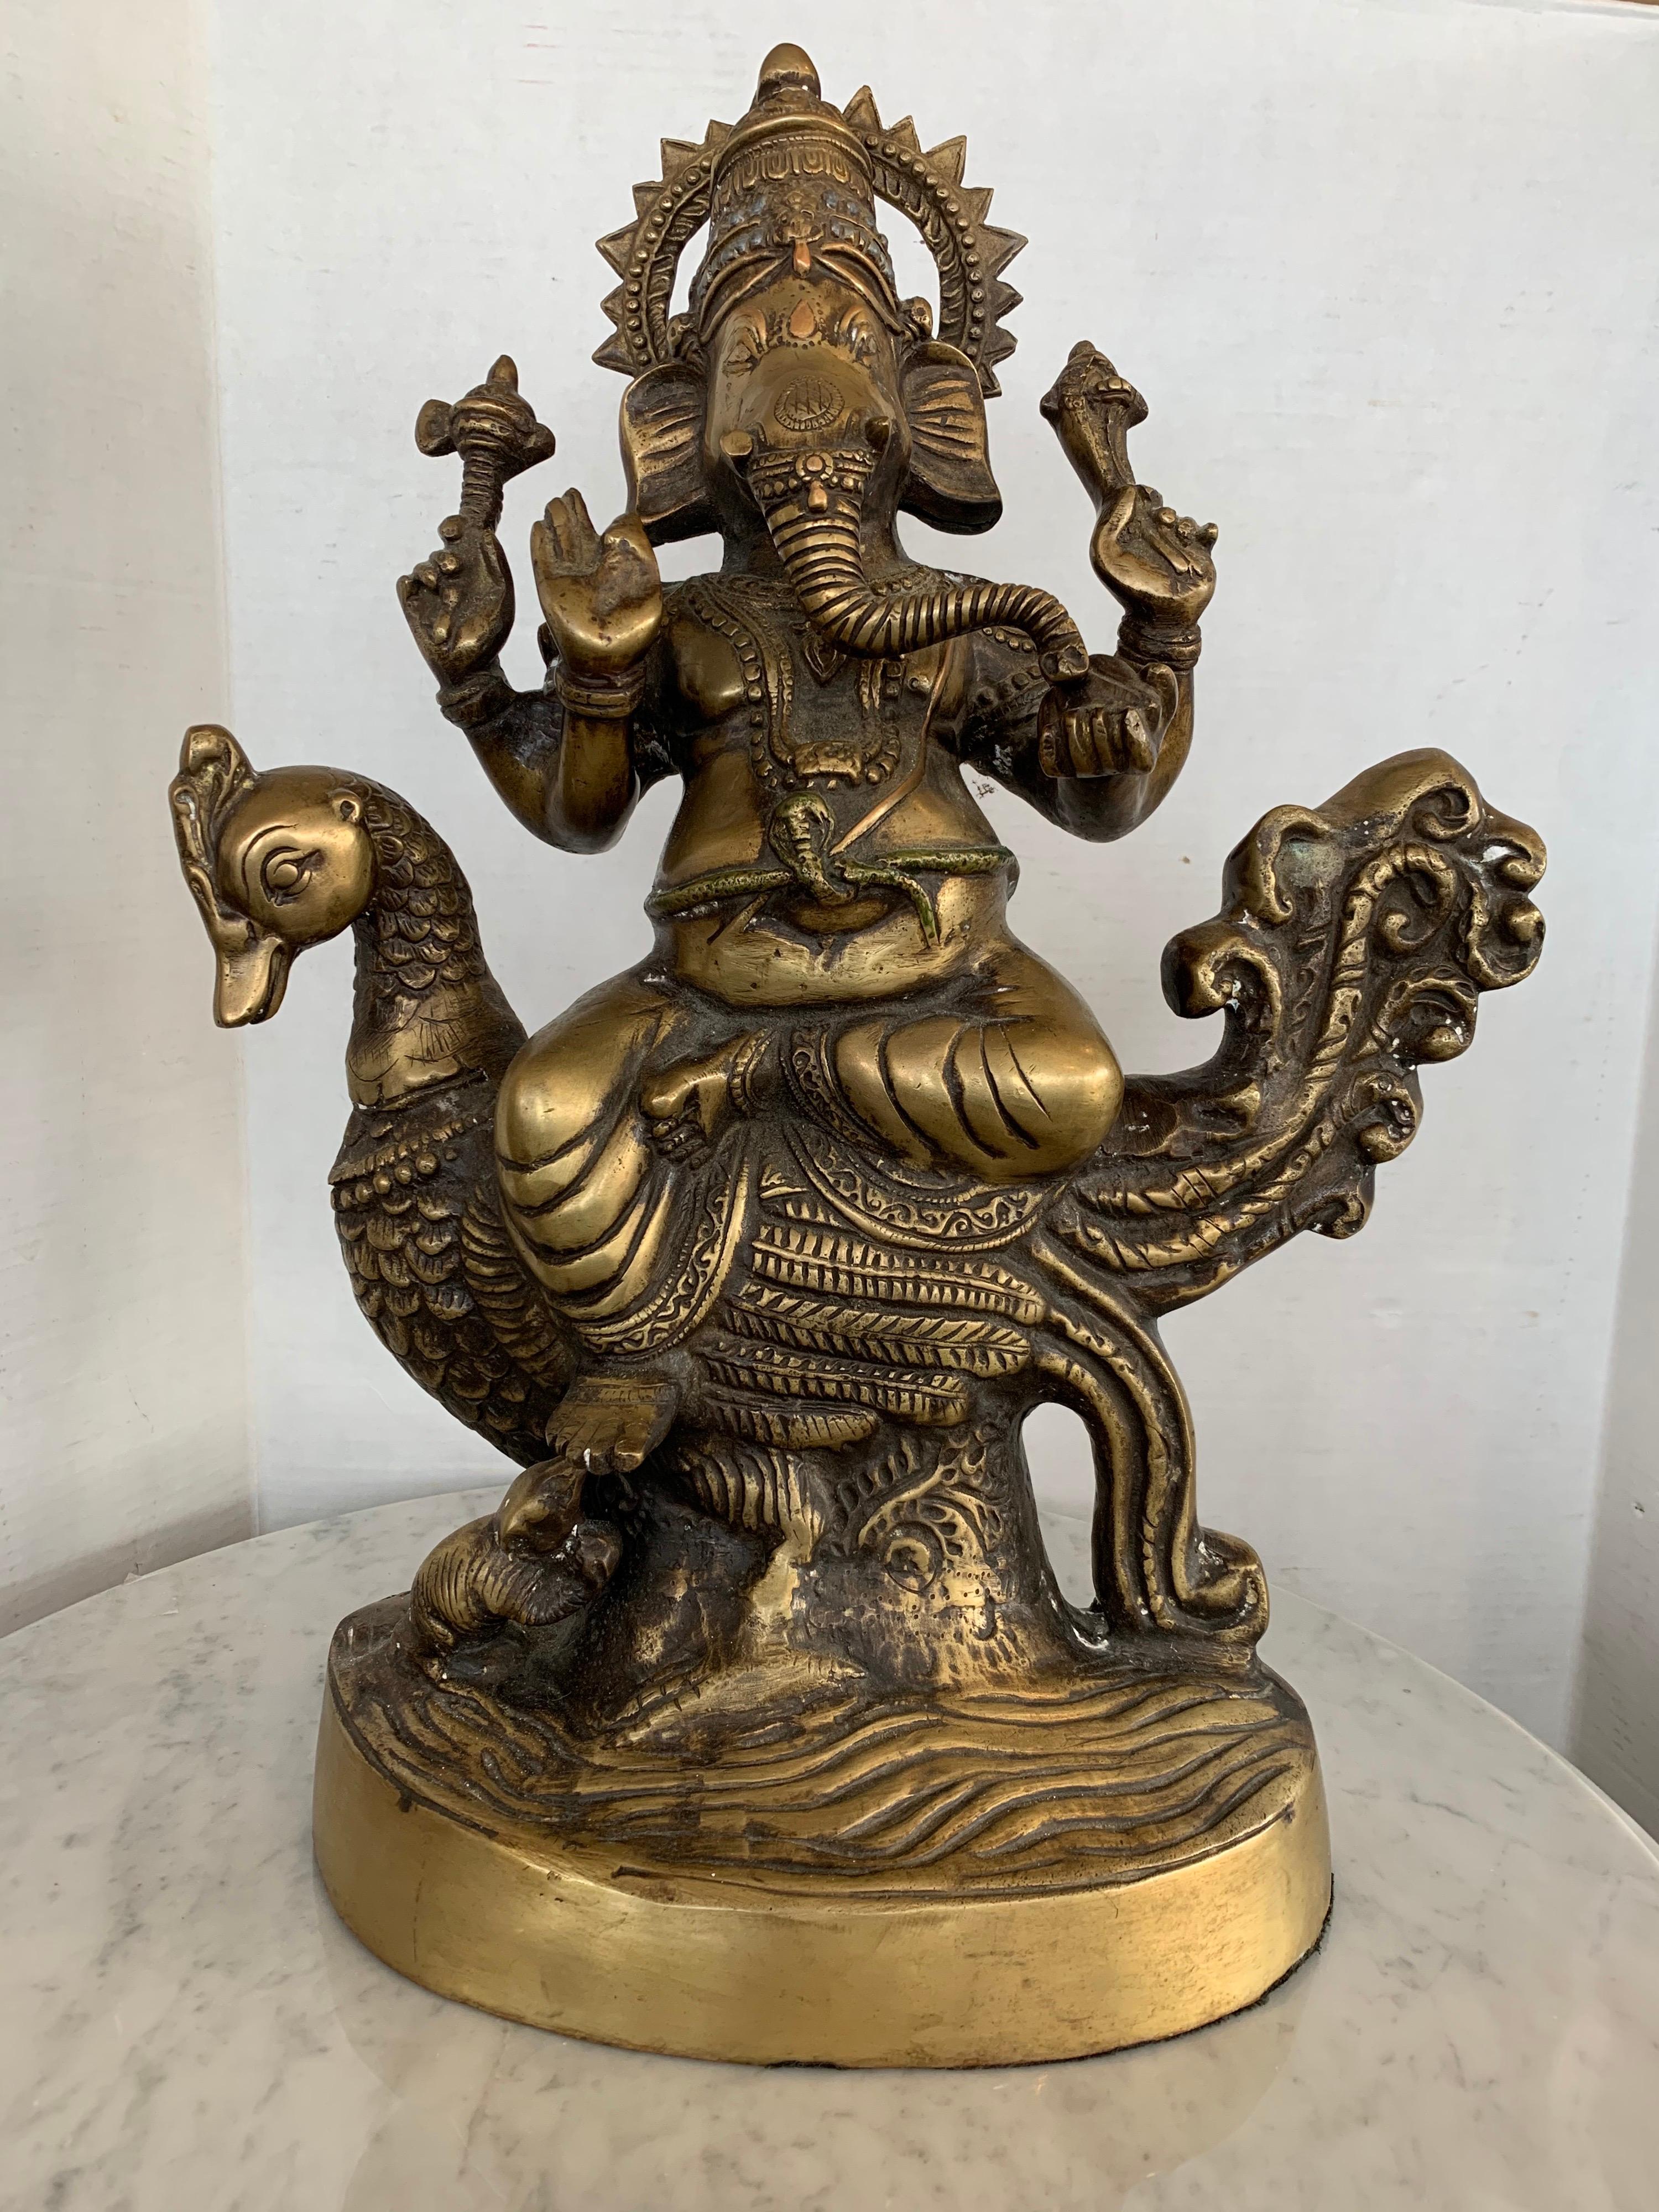 This is a stunning bronze sculpture of Ganesha. This detailed sculpture depicts Ganesha, the Hindu god of success in a seated position. He is know in Asia to symbolize success, good luck and pervasiveness. He is elaborately dressed and holding a